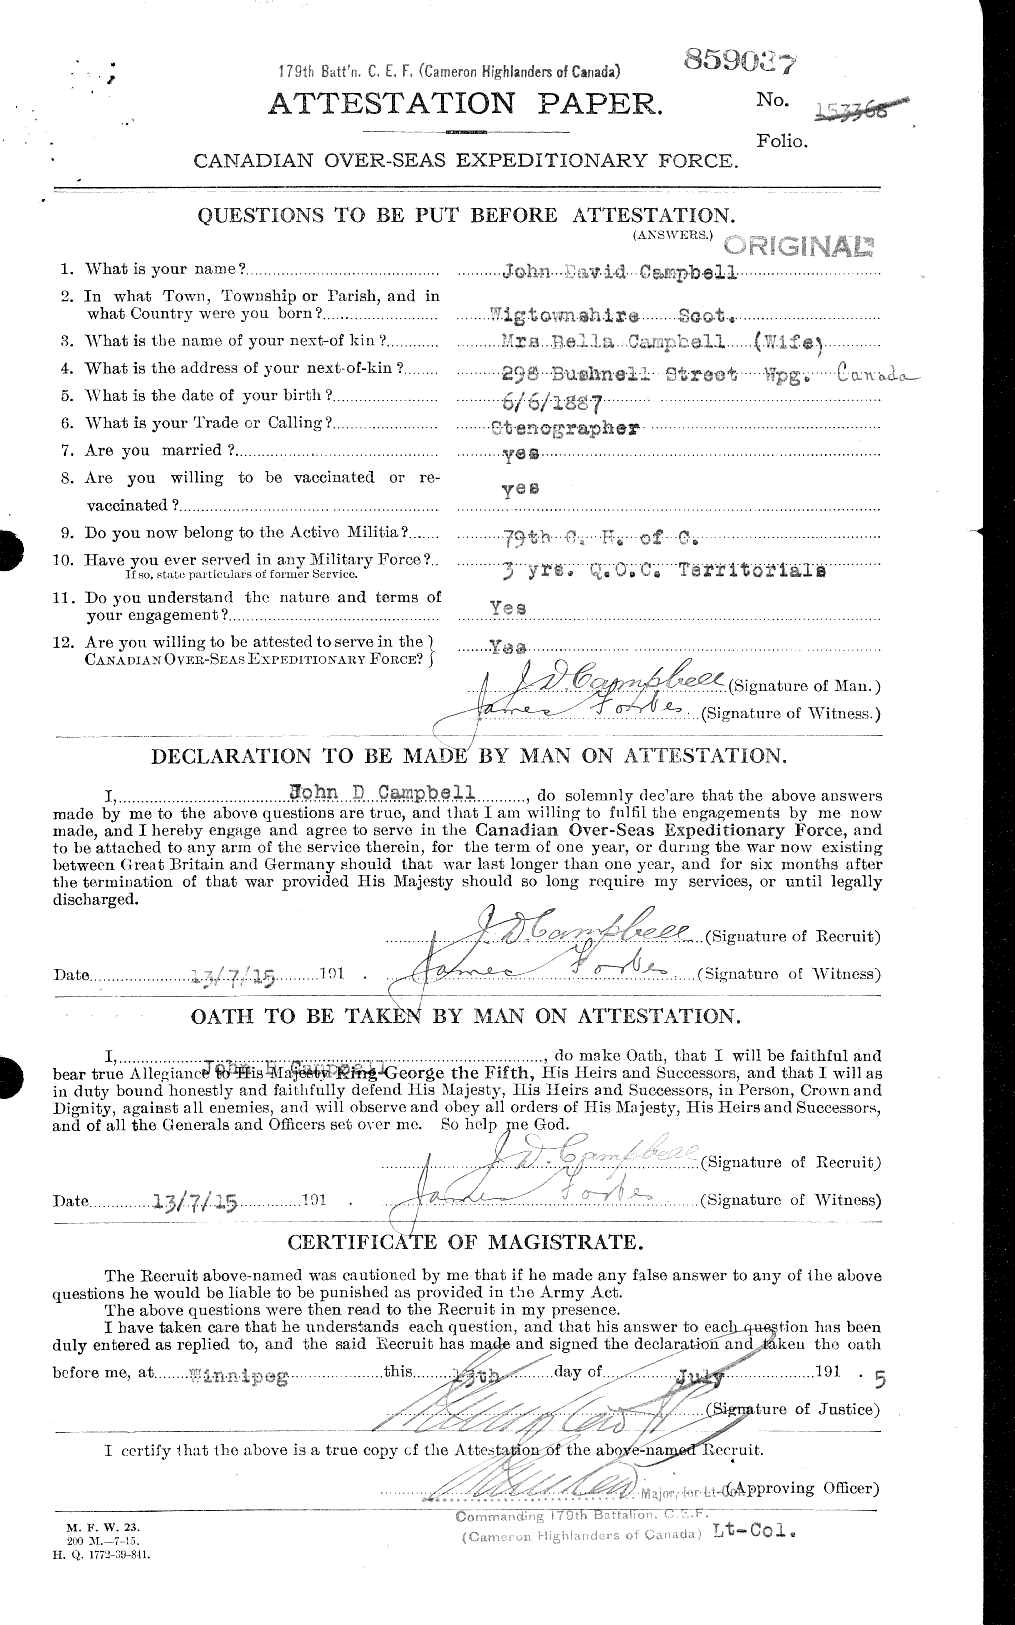 Personnel Records of the First World War - CEF 008499a